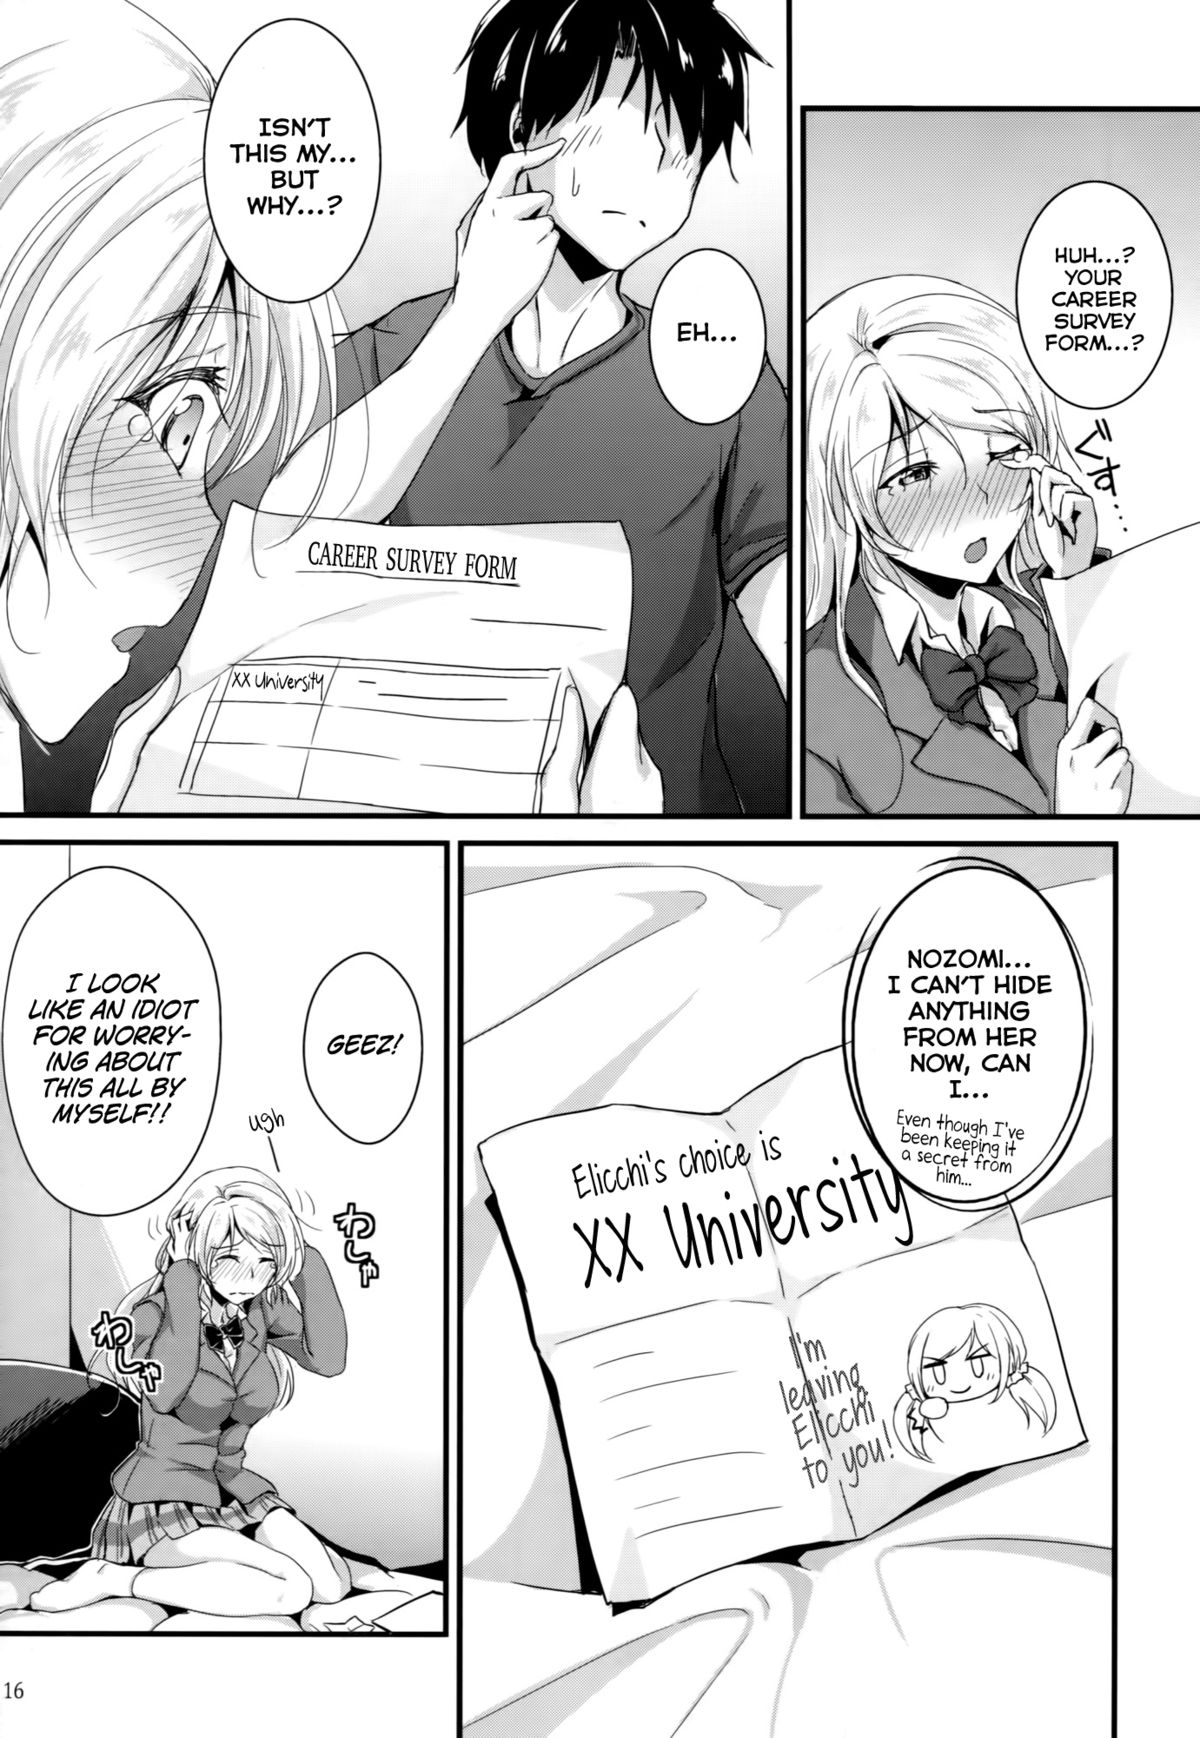 (C87) [Nuno no Ie (Moonlight)] Let's Study××× 5 (Love Live!) [English] [Facedesk] page 15 full